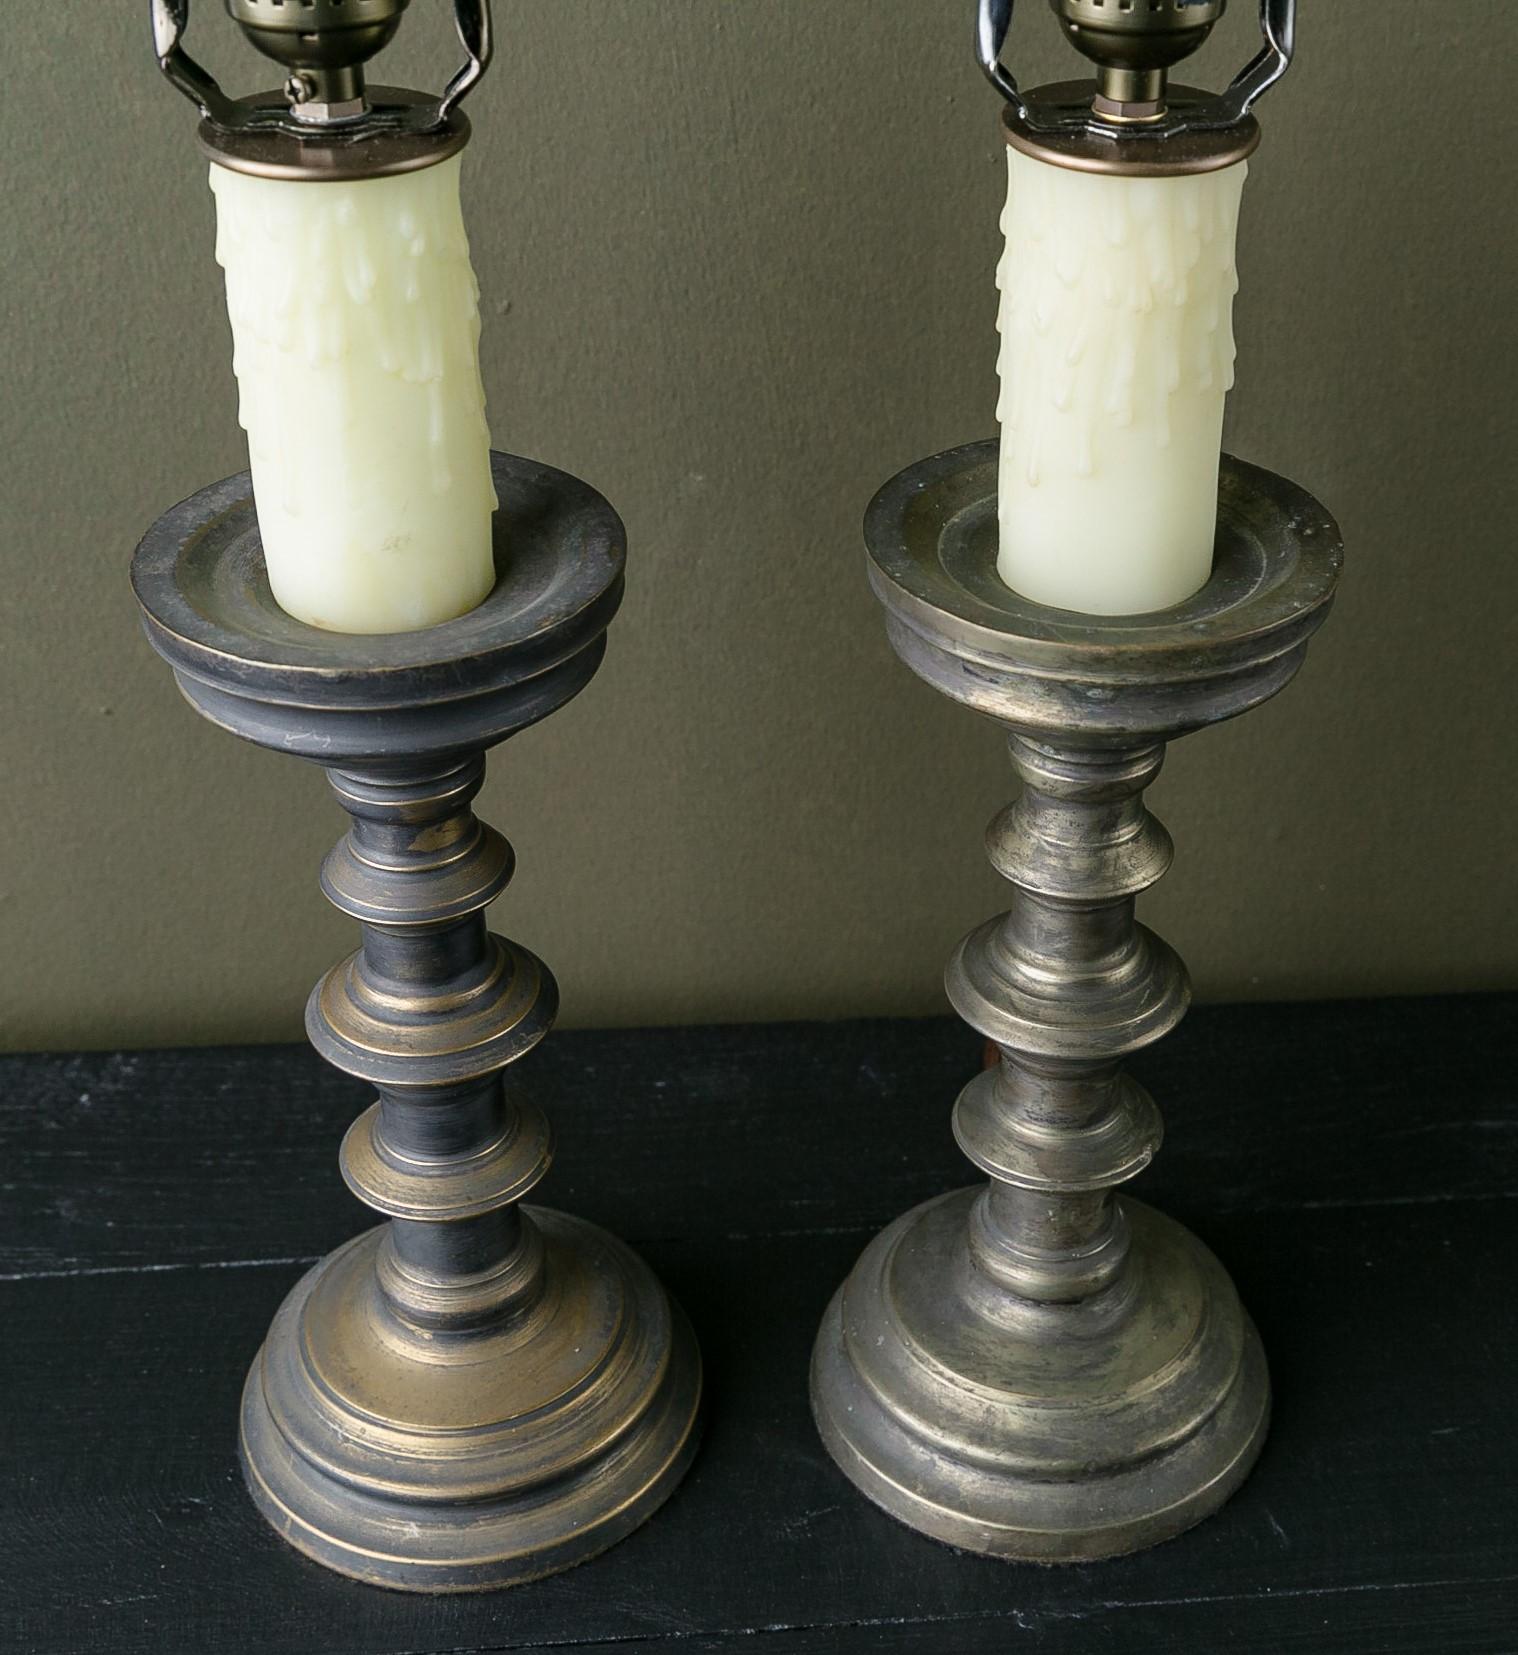 This pair of lamps has a beautiful patina and they are newly wired for the US market. They have a classic or perhaps colonial feel. They would be at home with French, English or American style interiors.